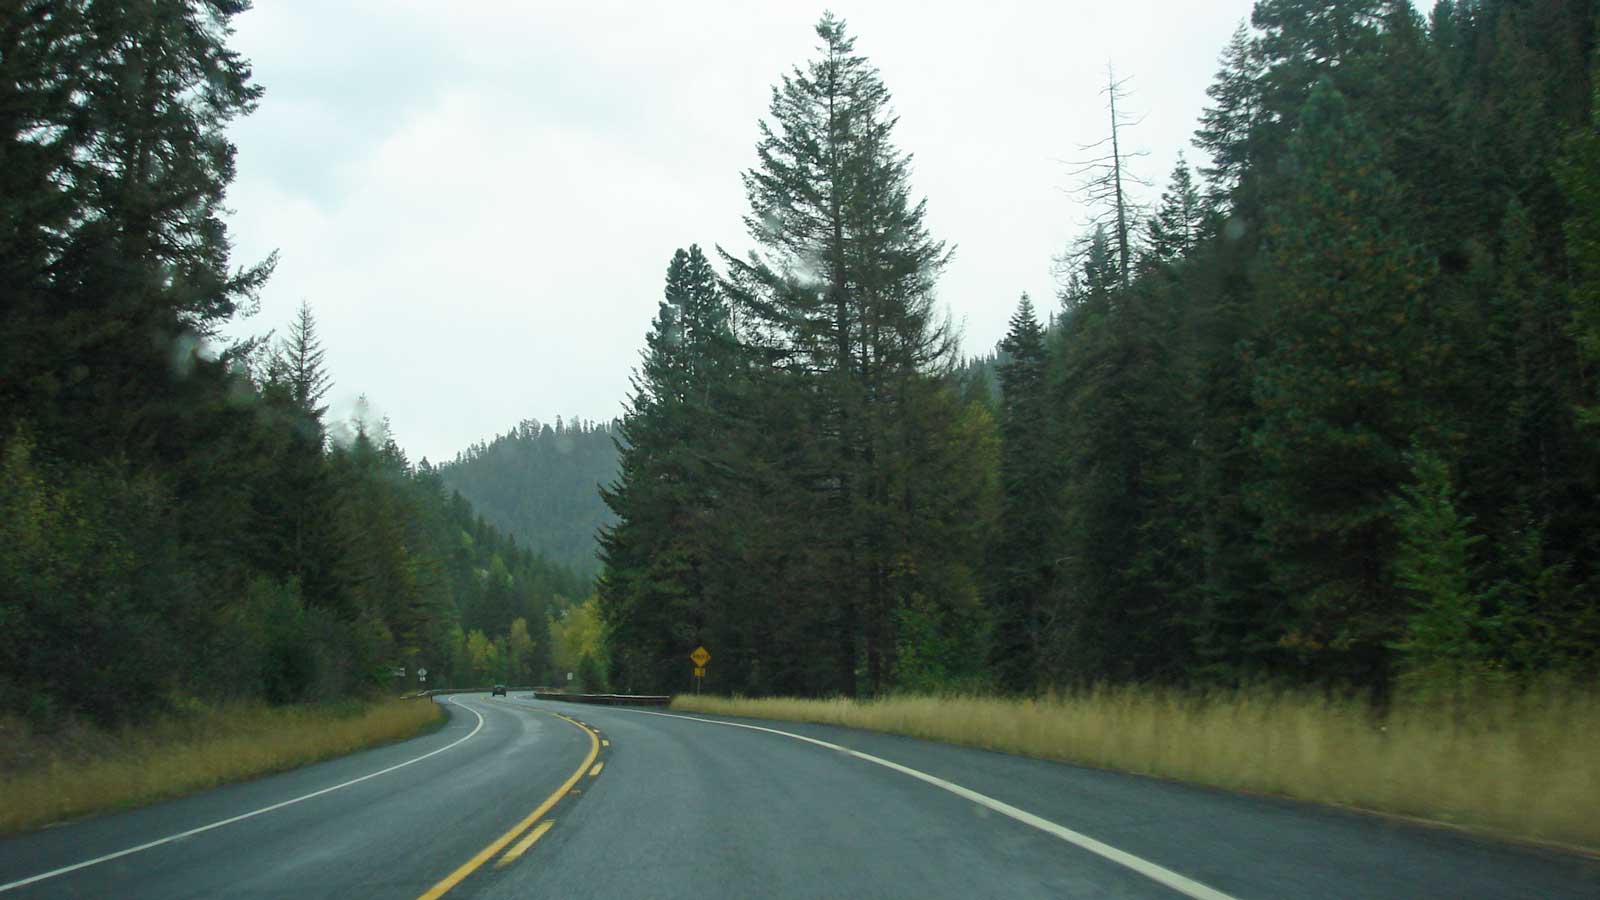 The road ahead, wet with rain and surrounded by forest